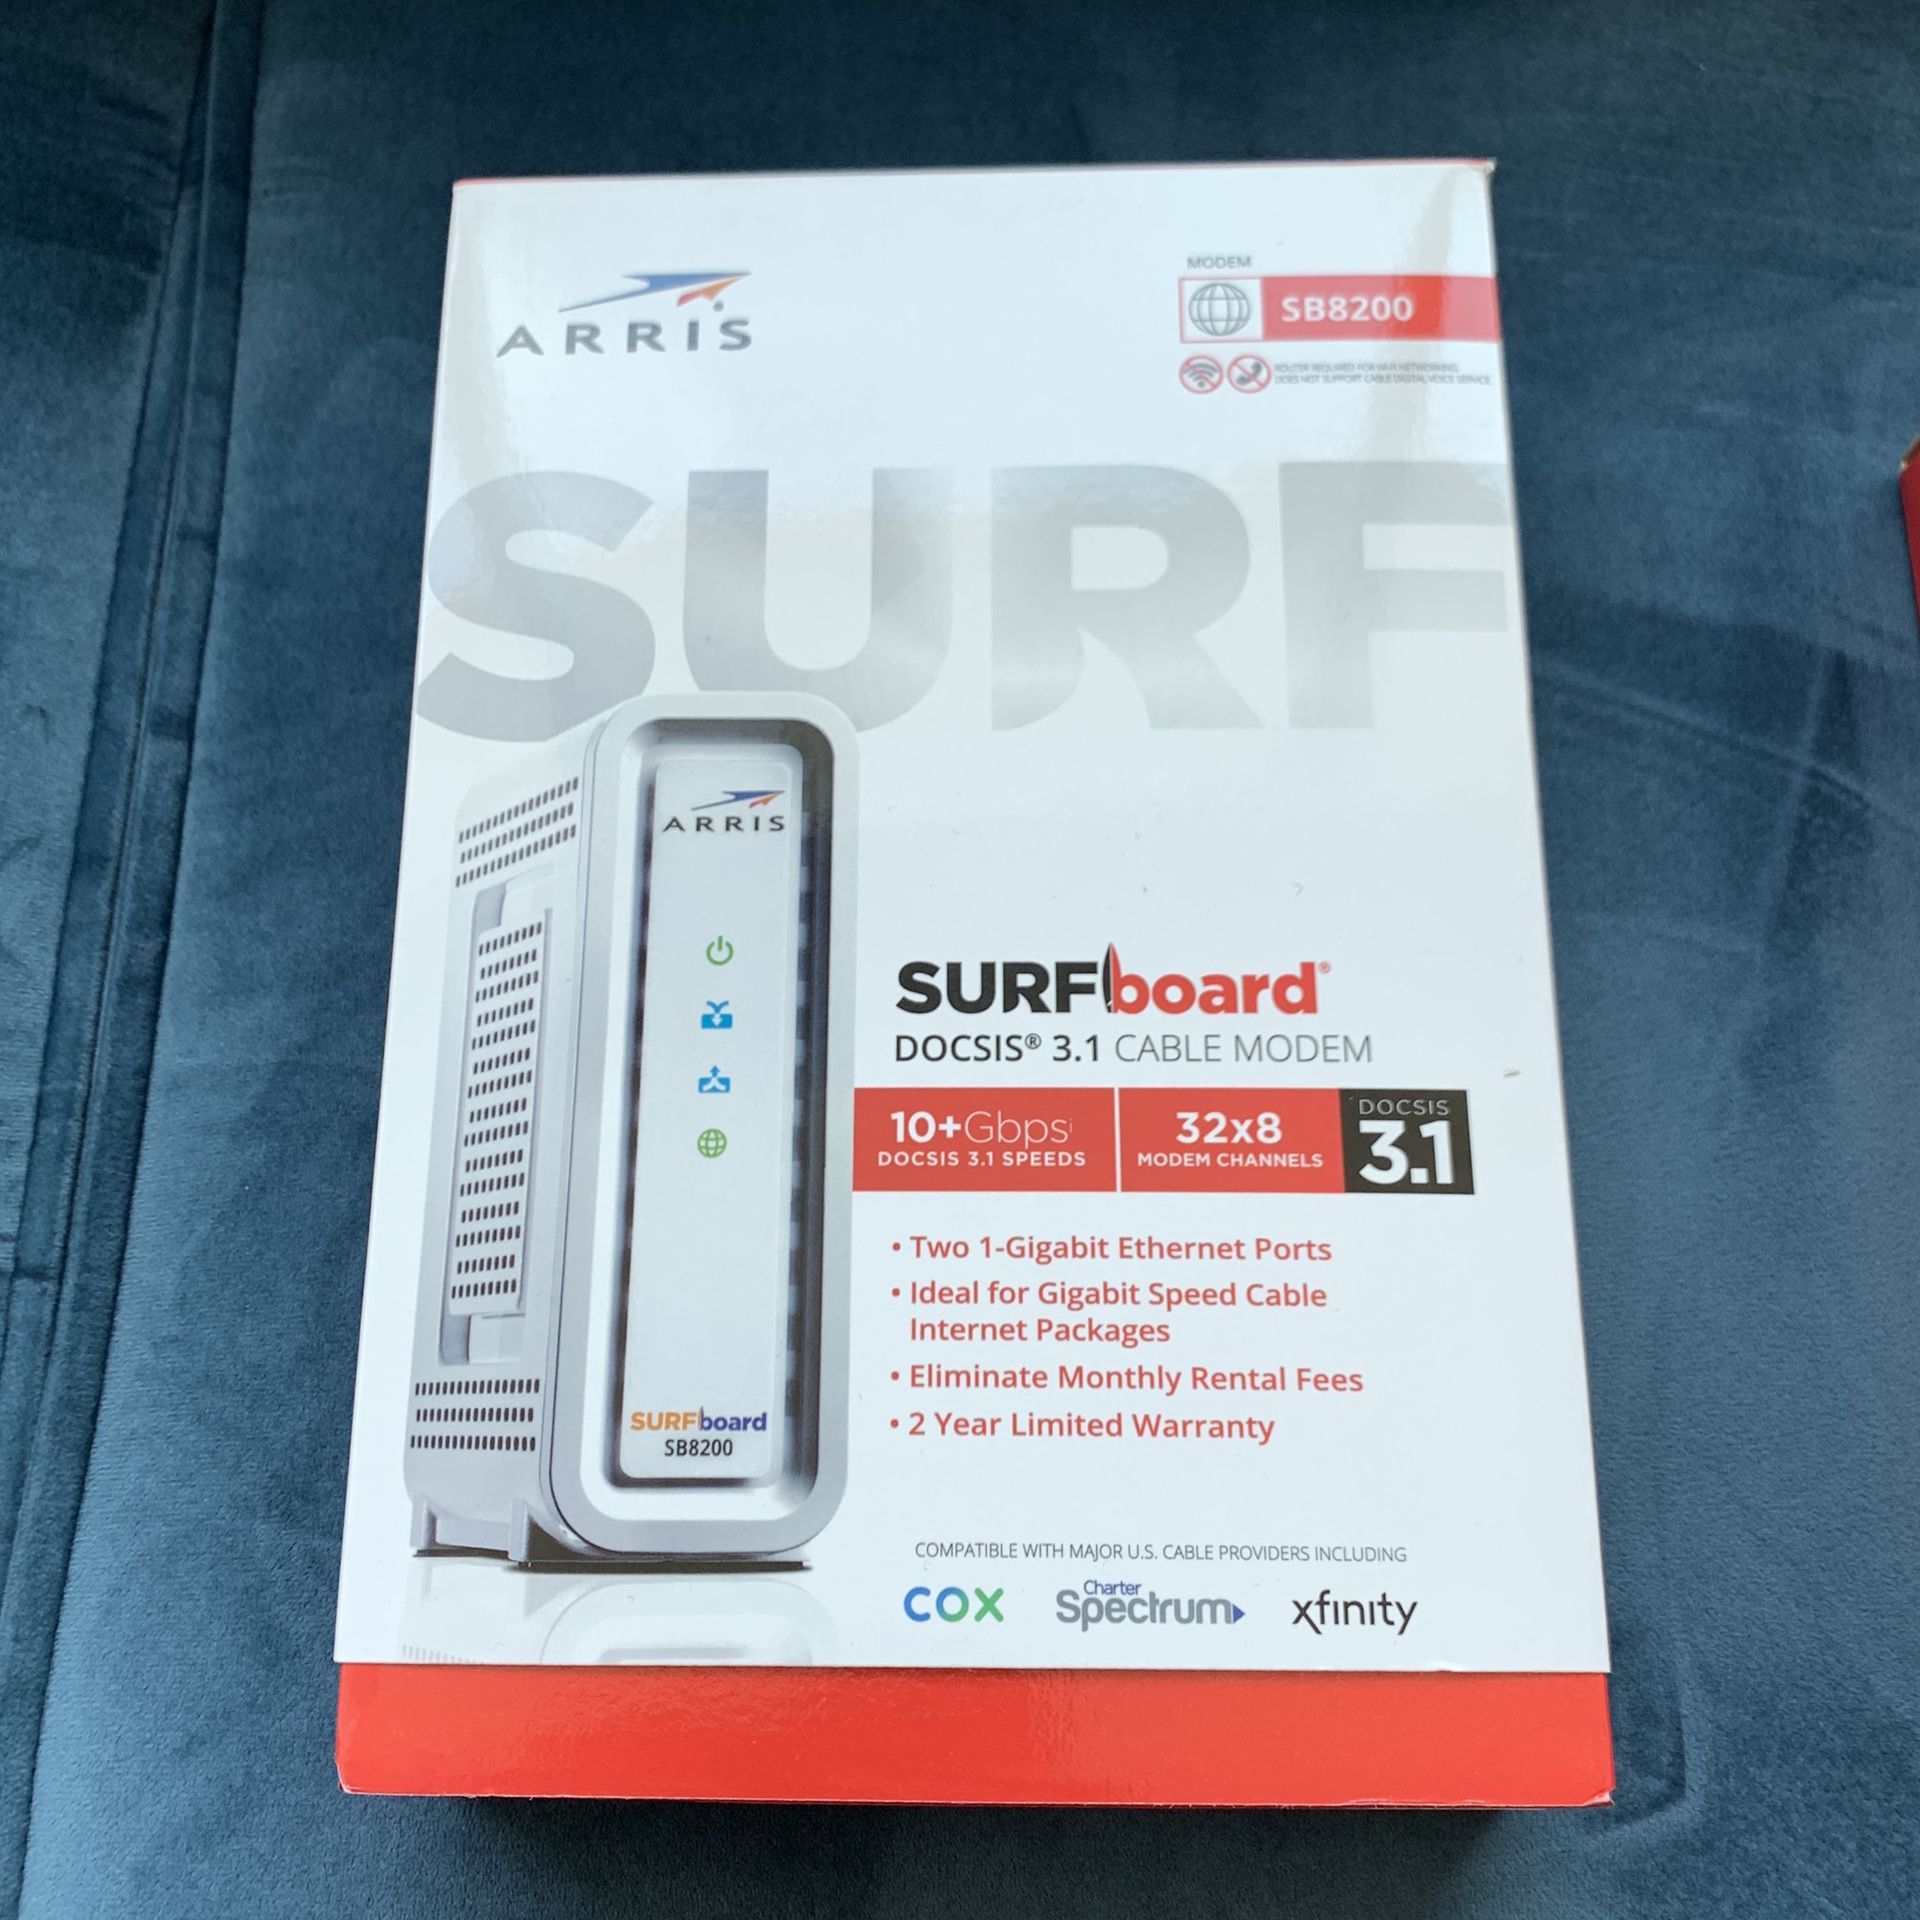 ARRIS SURFboard SB8200 DOCSIS 3.1 Gigabit Cable Modem, Approved for Cox, Xfinity, Spectrum & others